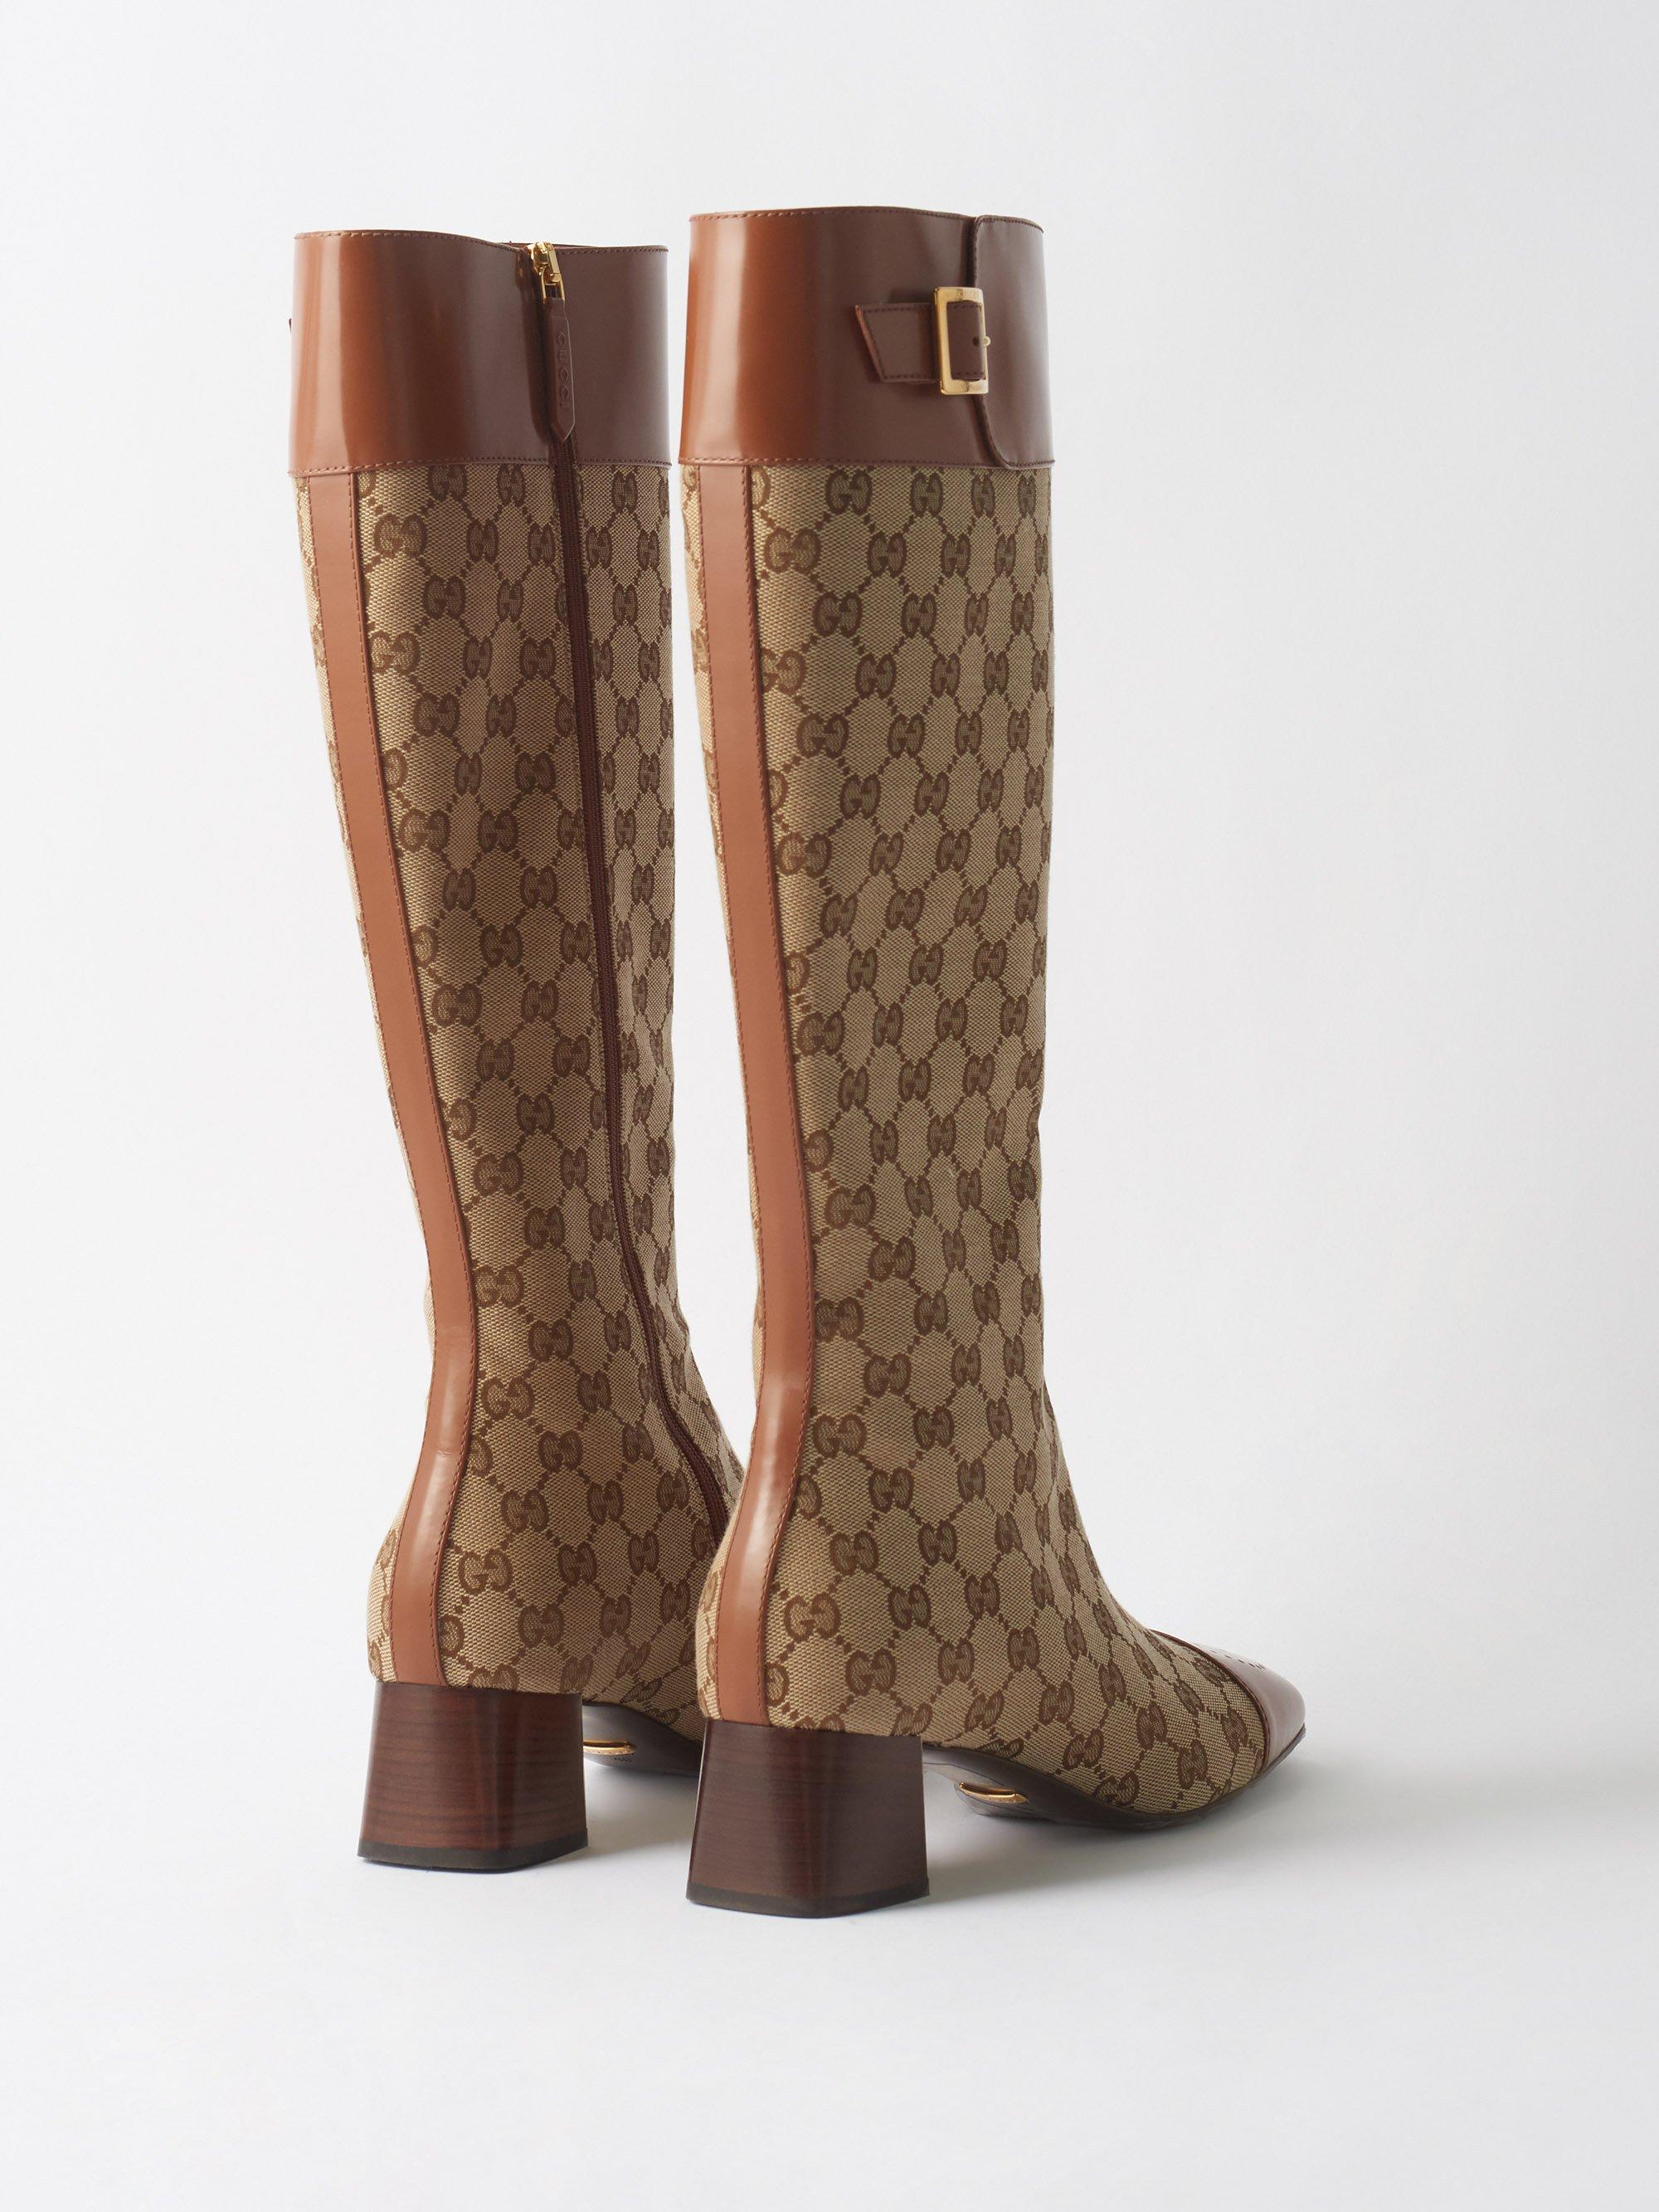 Gucci Ellis Gg-monogram Canvas Knee-high Boots in Natural